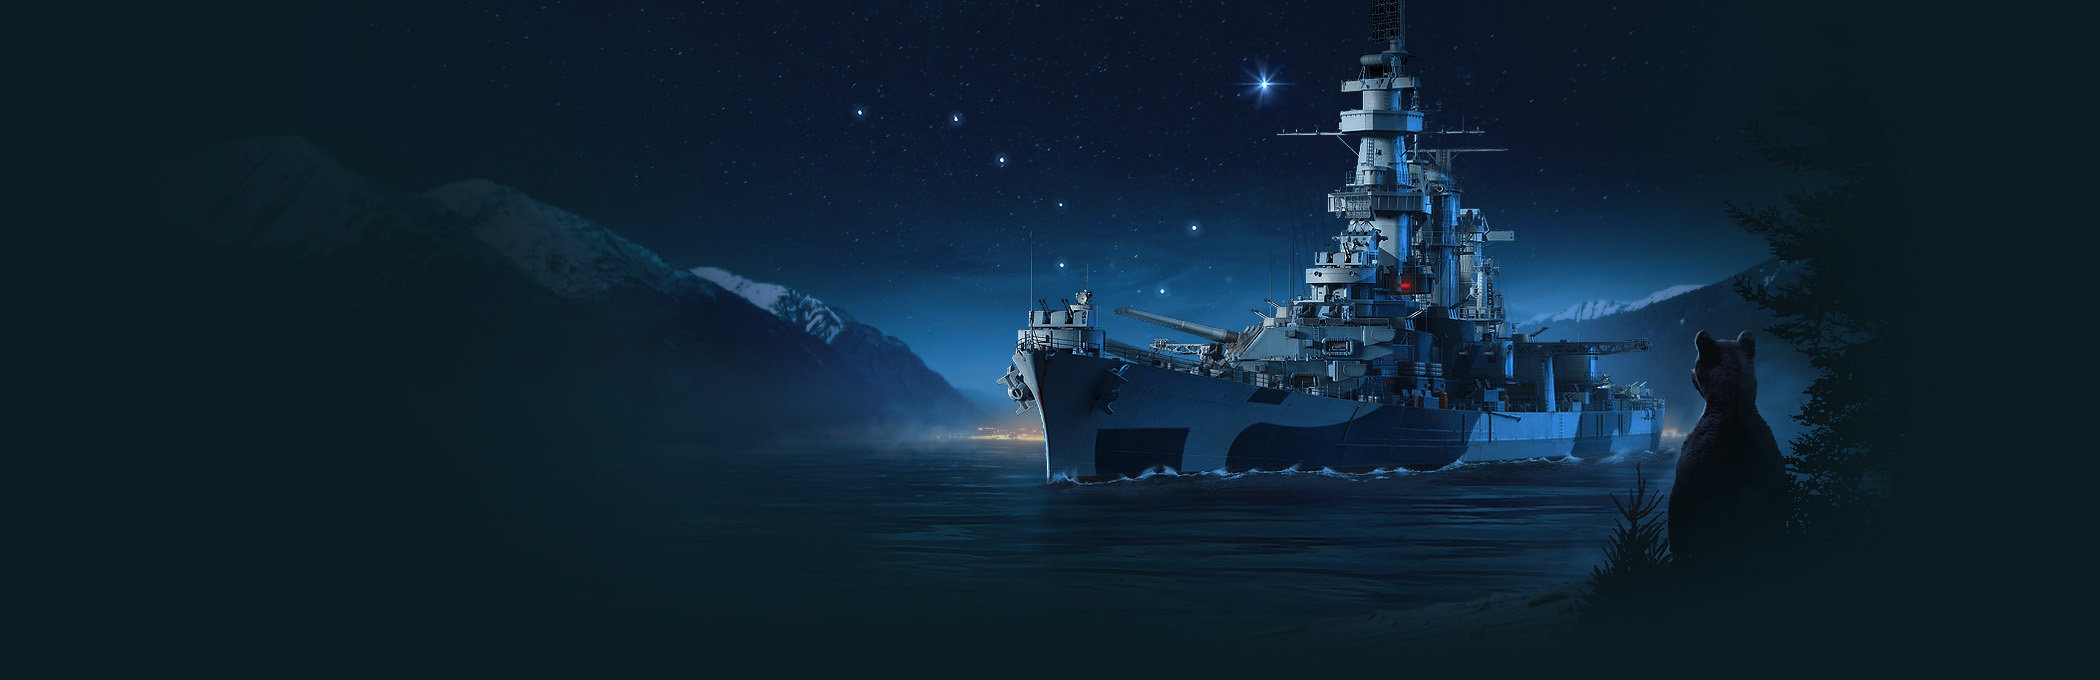 Alaska At Night Wallpaper By Wg Cruisers World Of Warships Official Forum